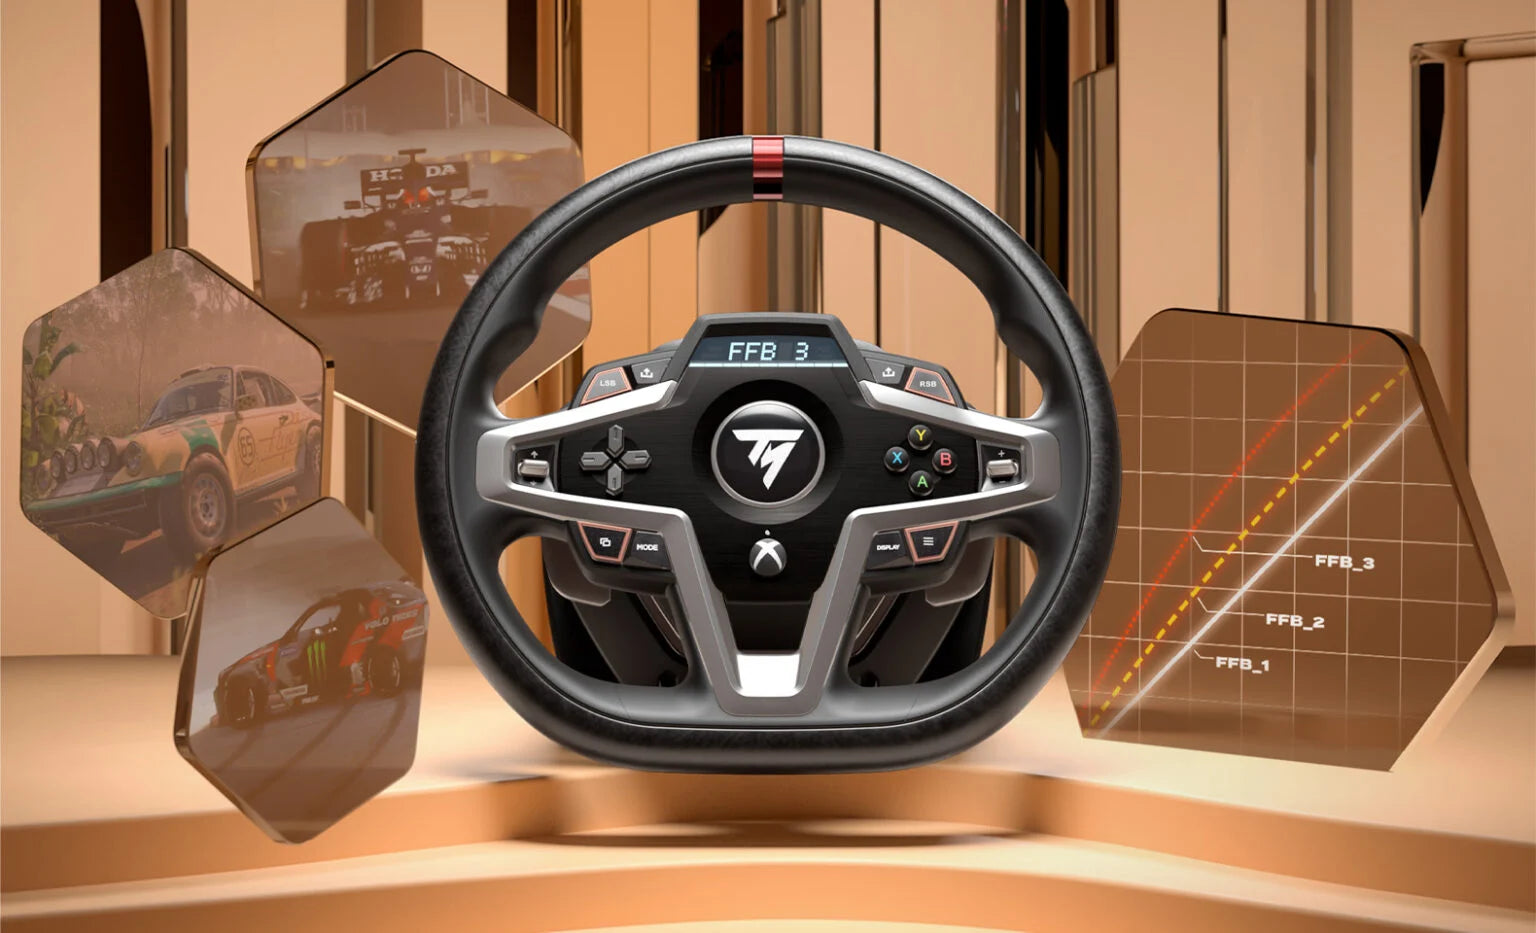 THRUSTMASTER T128 Racing Simulator Game Steering Wheel and Pedal Dynamic  Force Feedback for PC XBOX